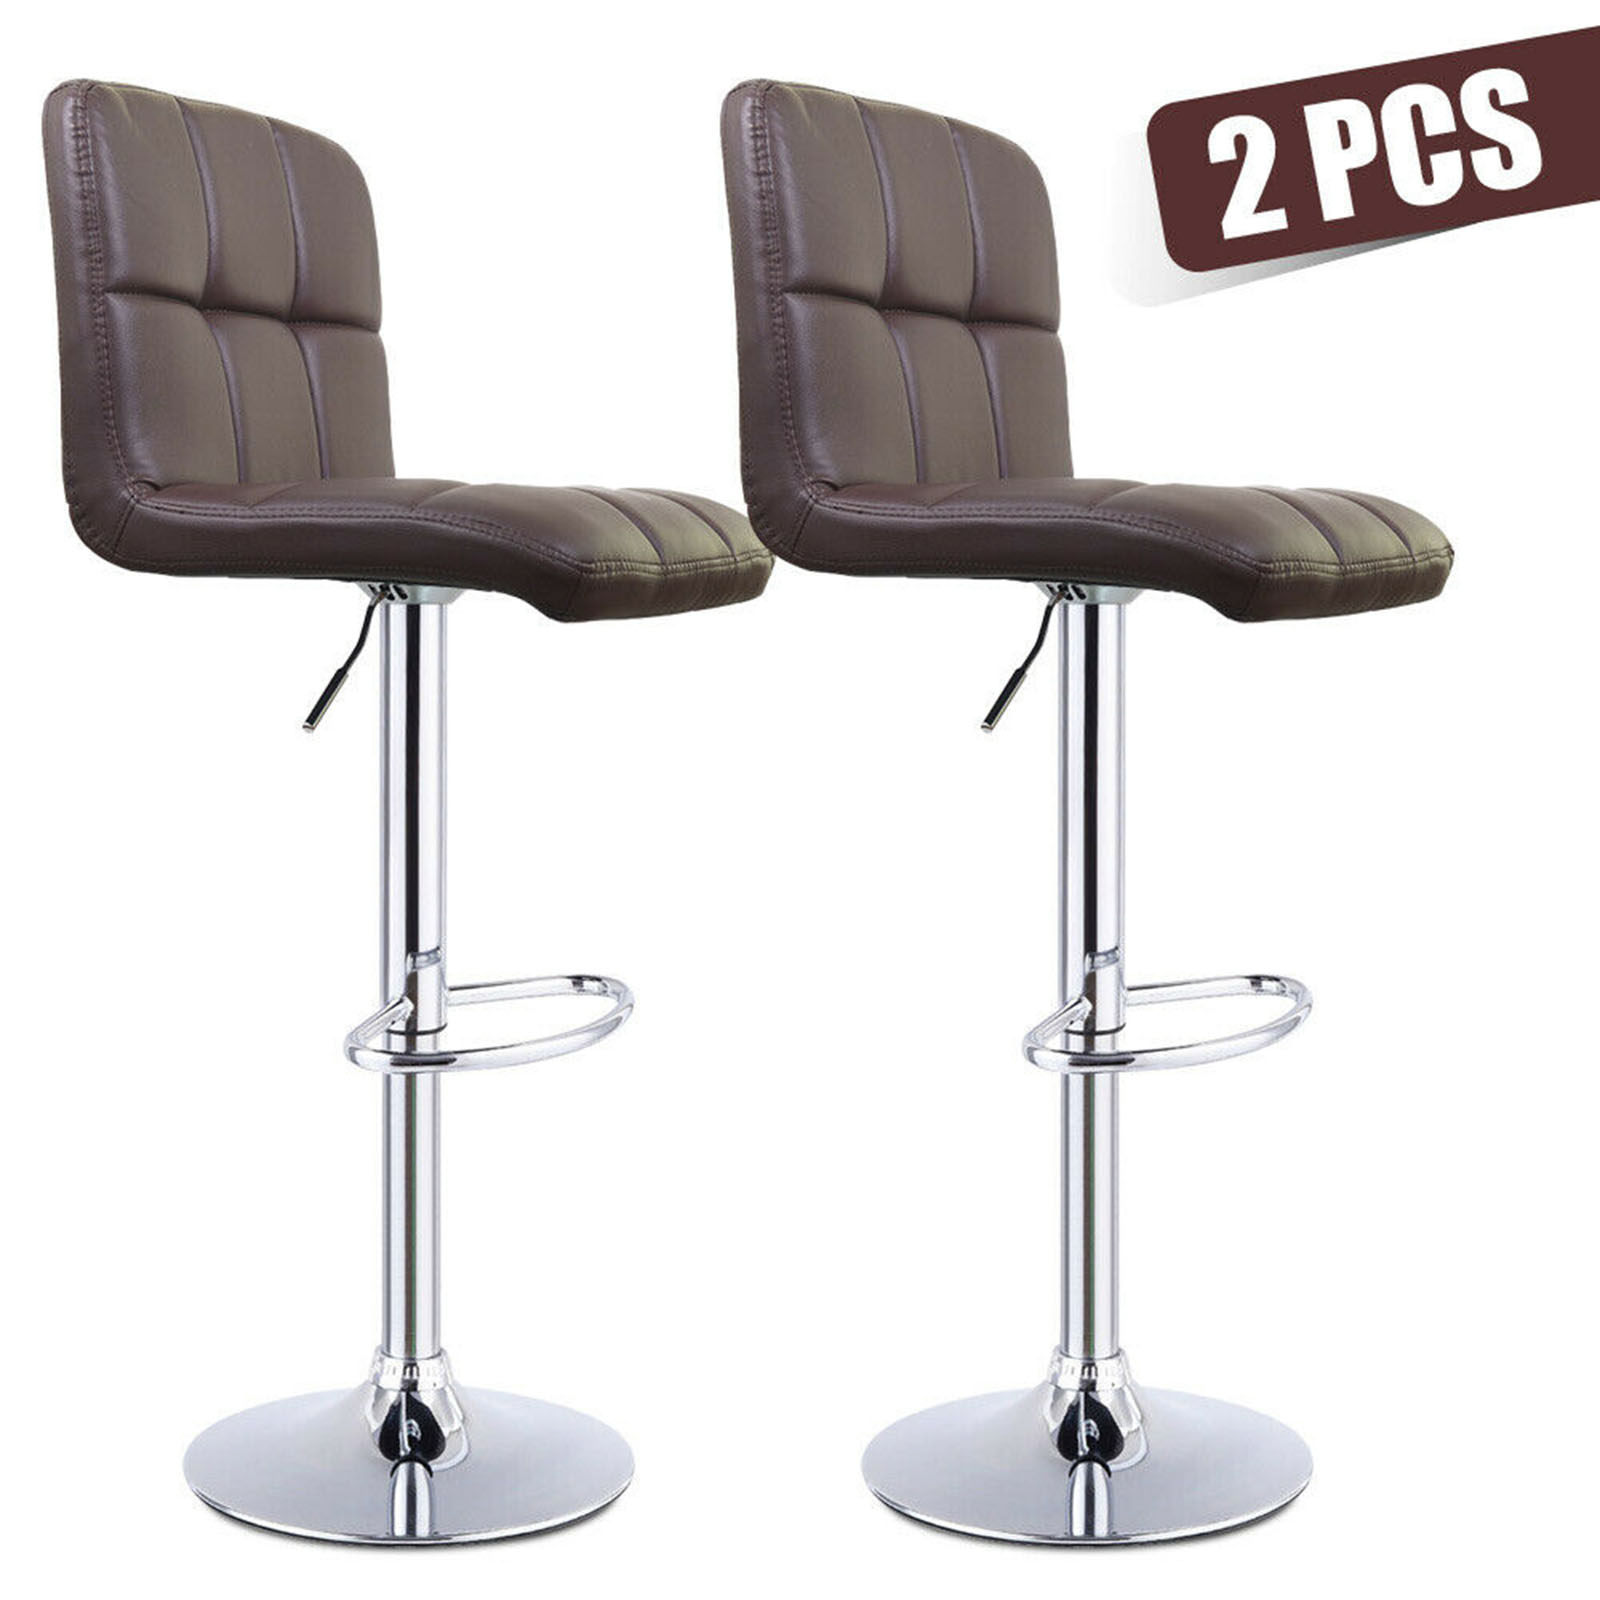 Modern Set of 2 Bar Stools with Back Dining Counter PU Chairs 360° Swivel Stool